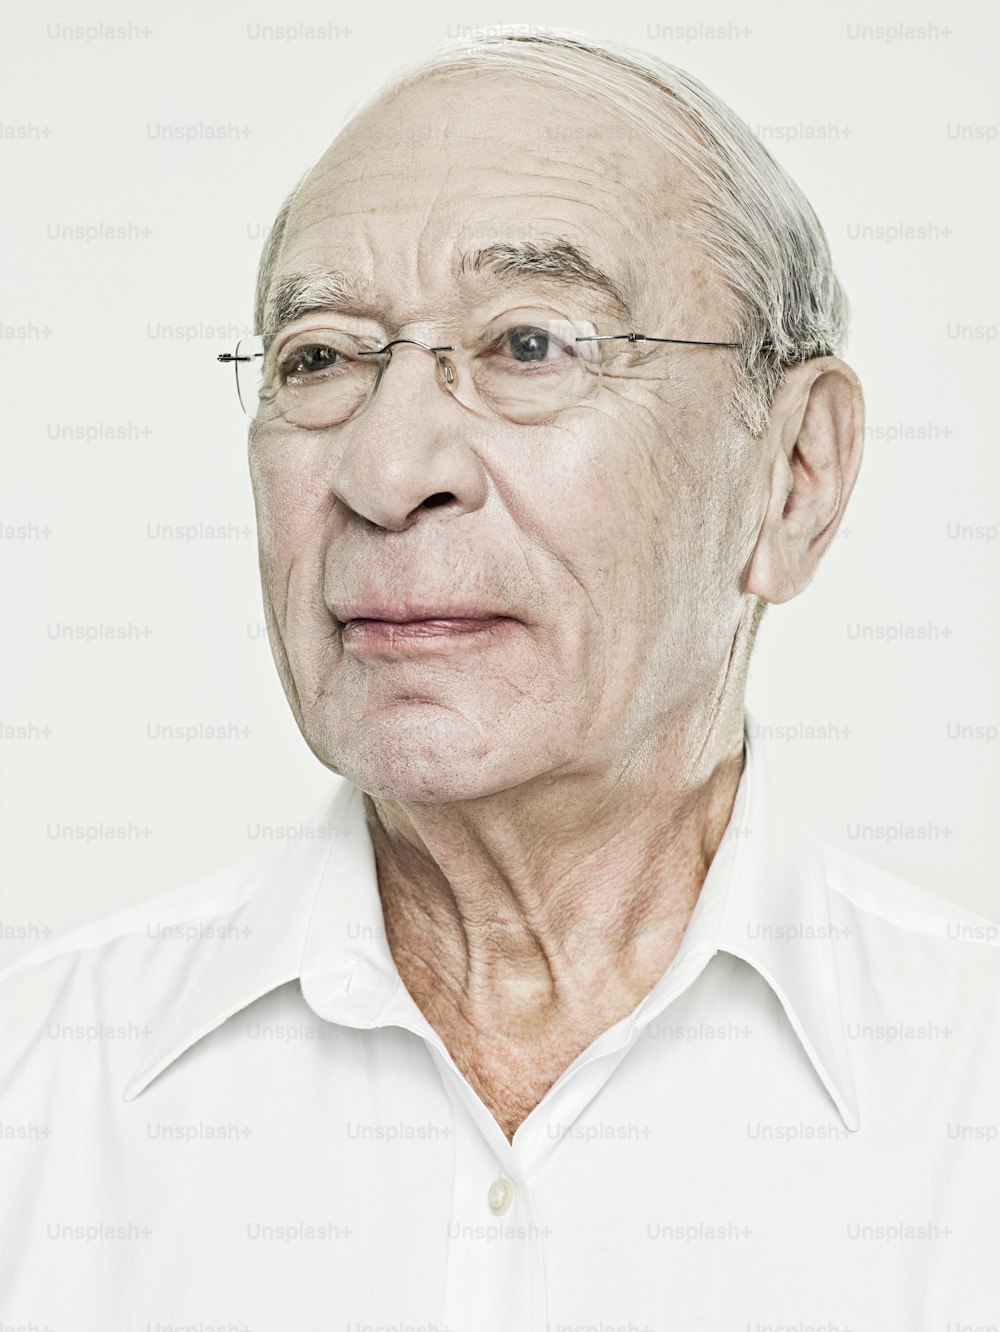 an older man with glasses and a white shirt